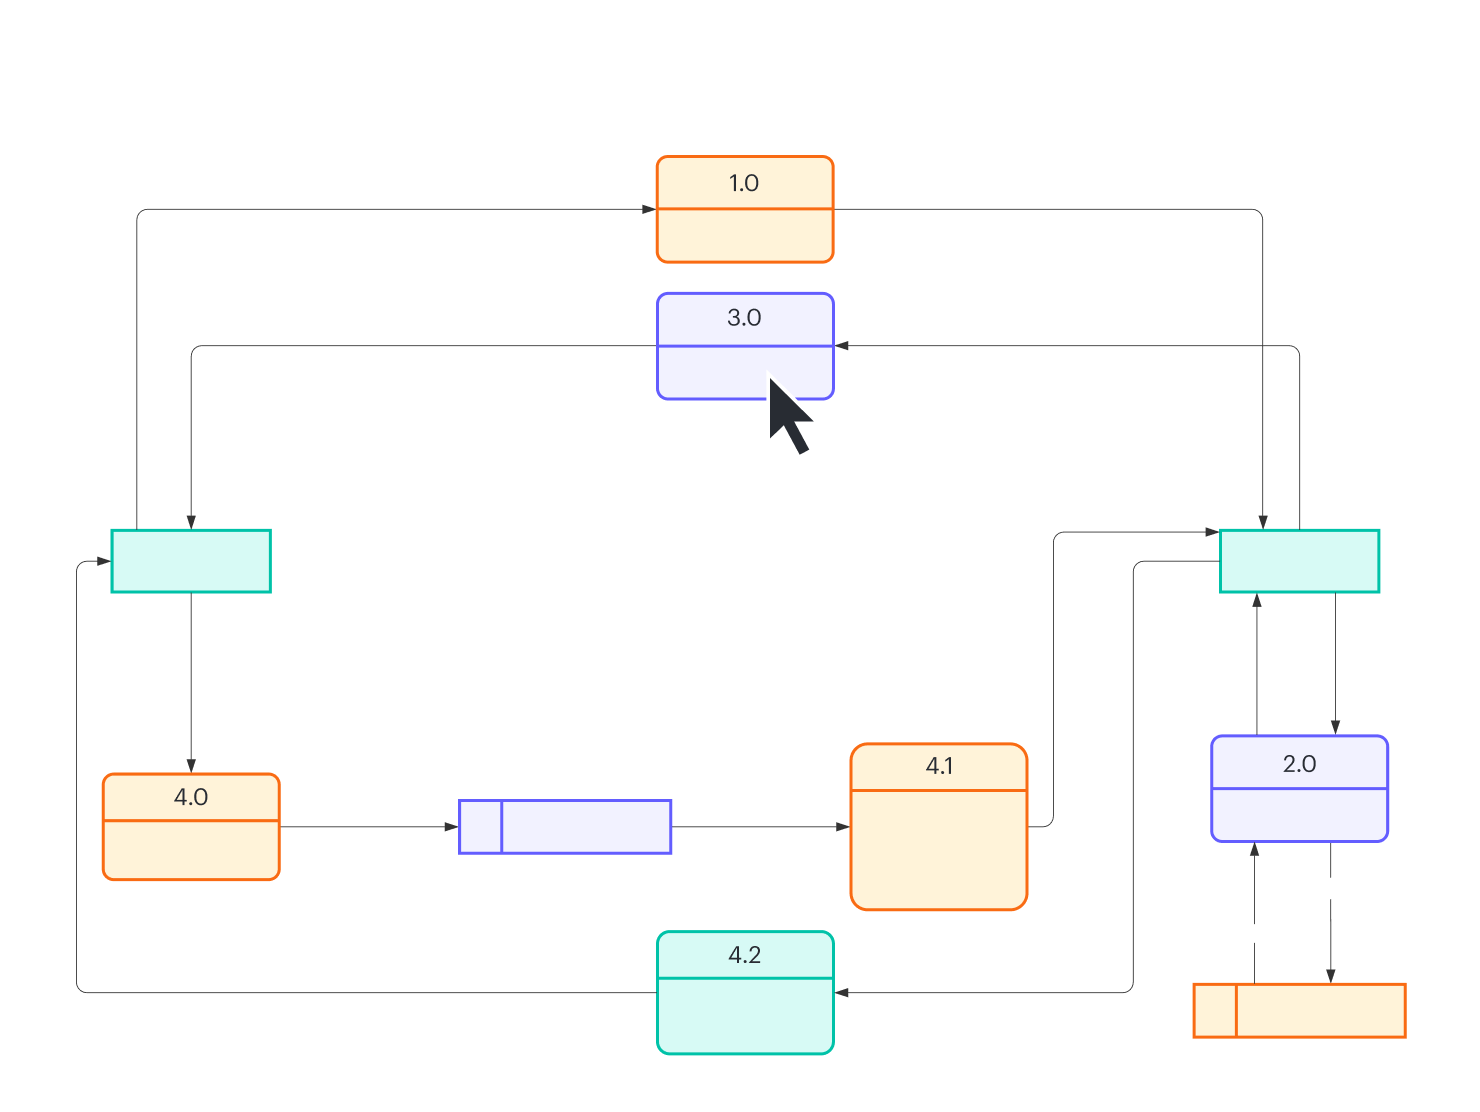 Complex ERD diagram example showing where the data comes from, where it goes, and how it gets stored. Lucidchart allows has an option to add live data to diagrams to get an accurate picture of your systems.